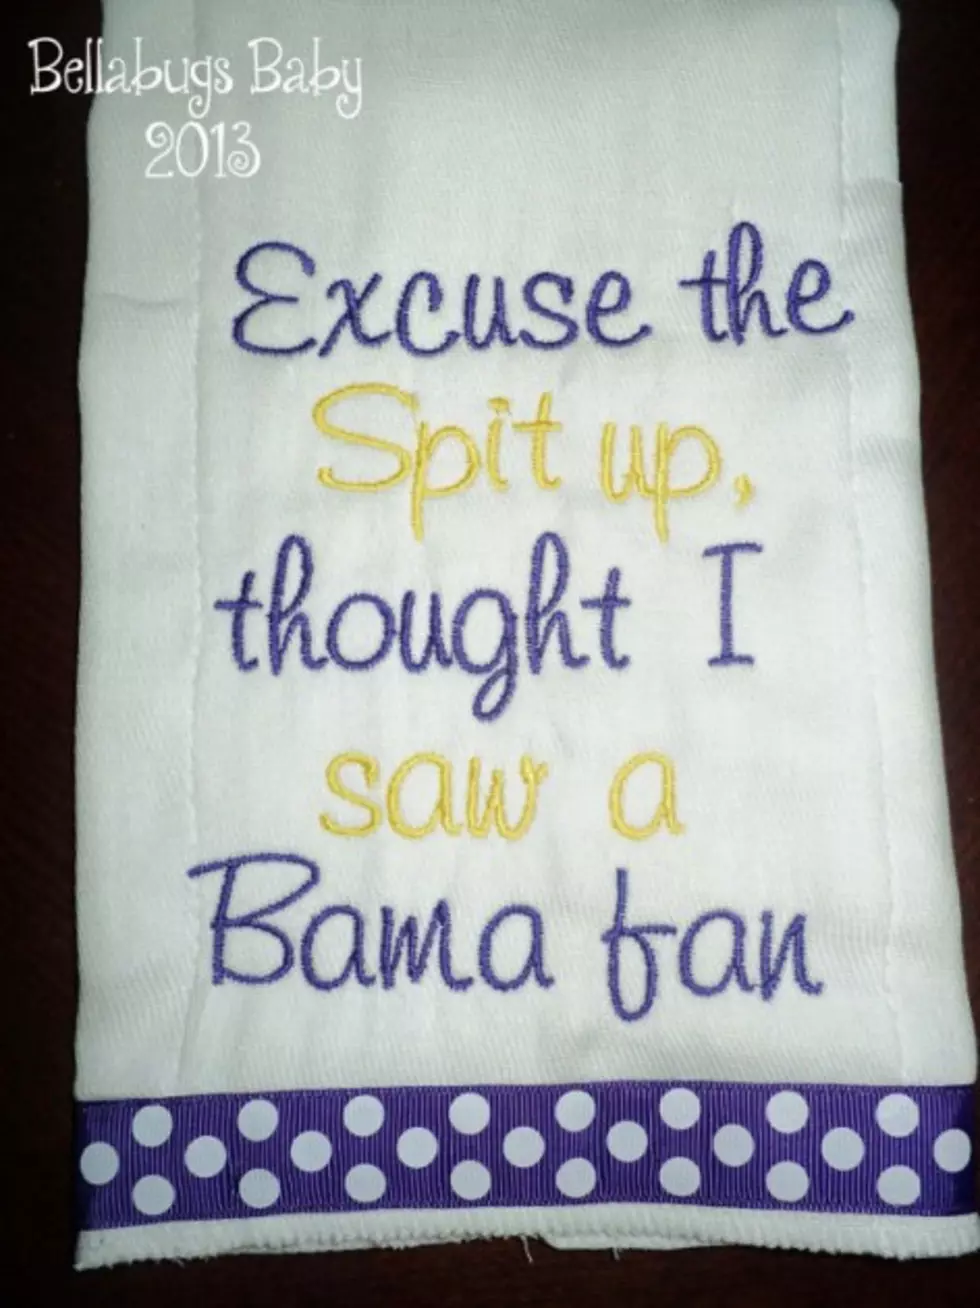 LSU &#8216;Excuse the Spit Up, I thought I Saw a Bama Fan&#8217; Baby Bib